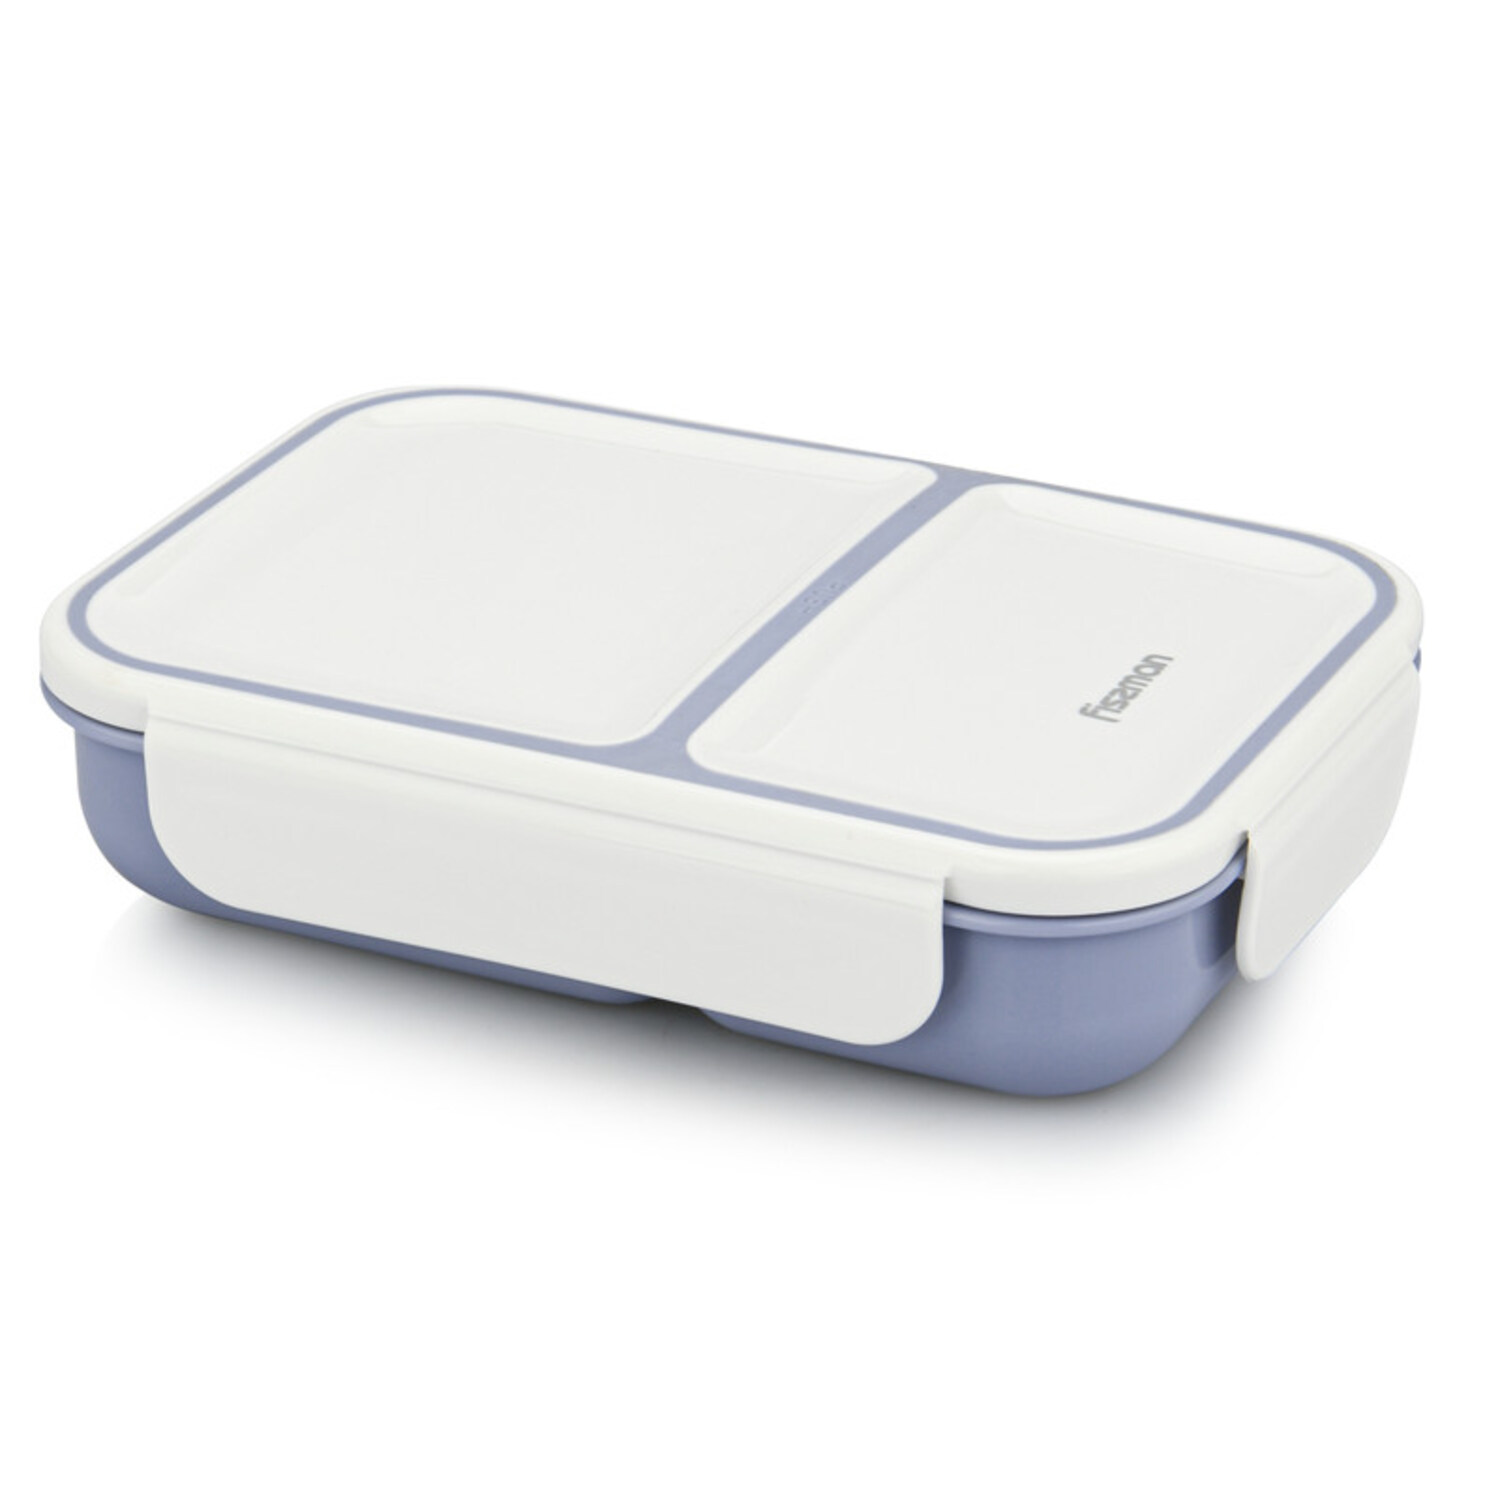 Fissman Lunch Box With Two Compartments 20X14X4.5Cm